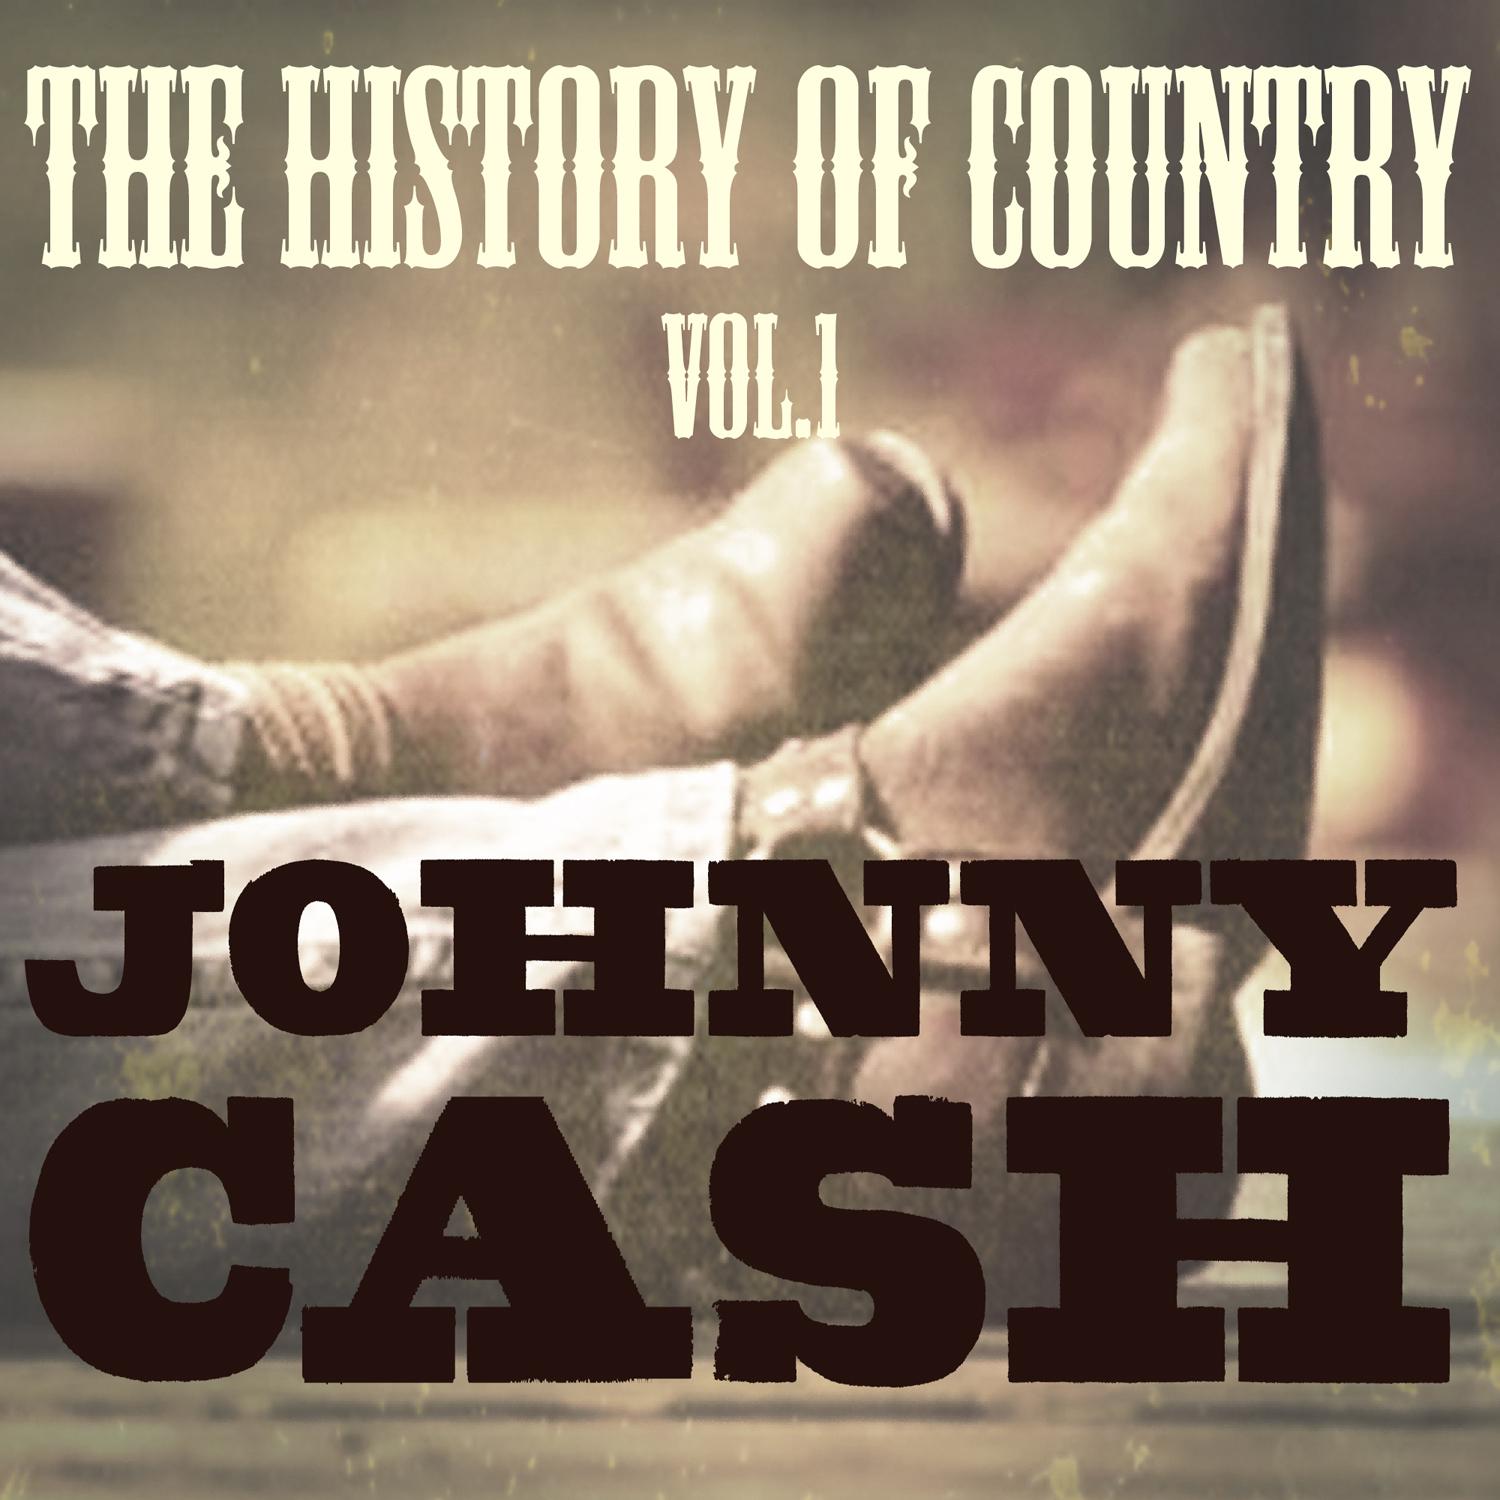 The History of Country Vol. 1